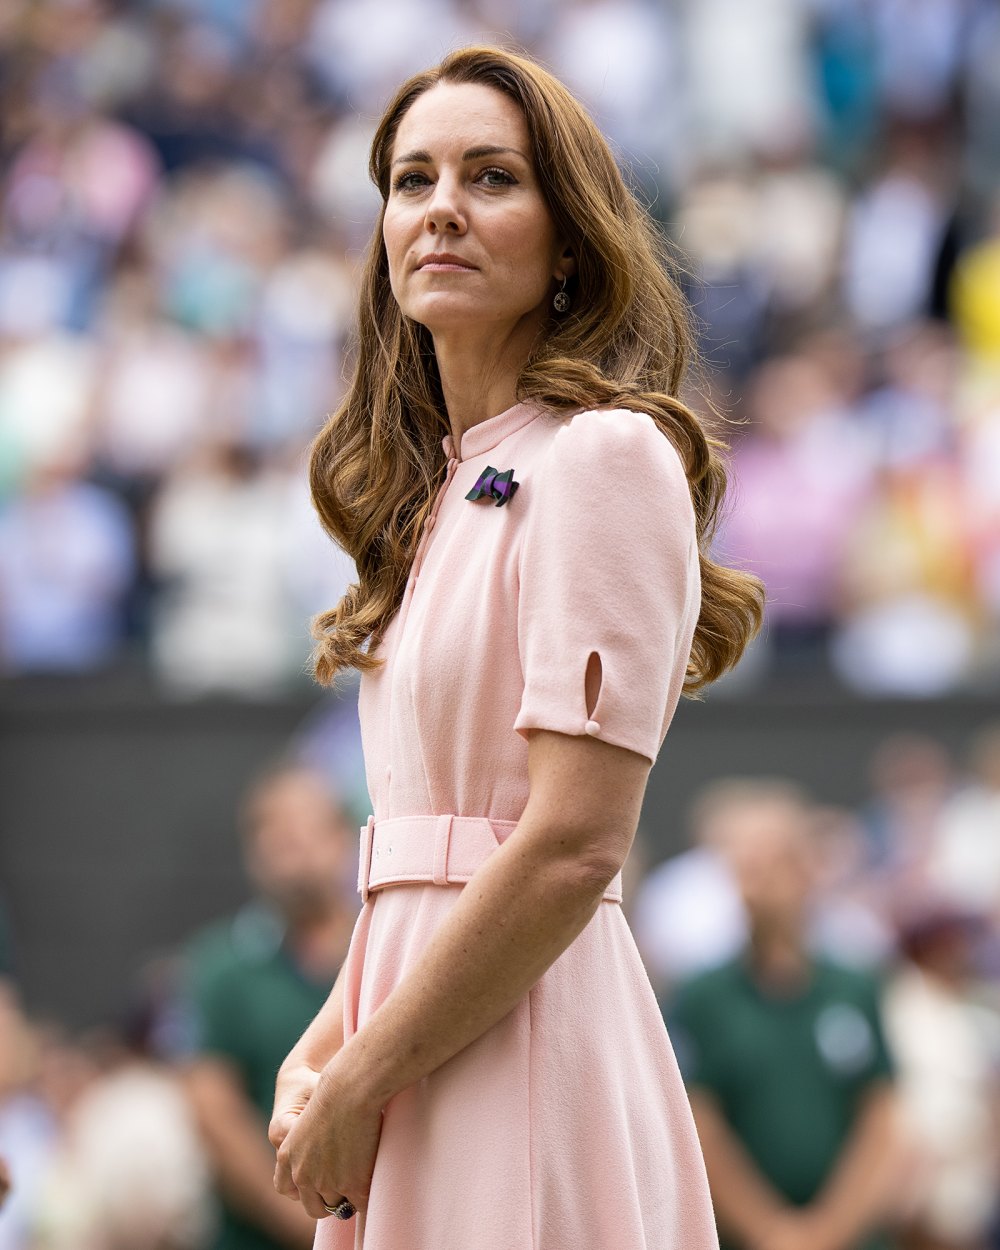 Kate Middleton Will Be 'Away' From the Public for 'Some Time' Amid Cancer Battle: Report